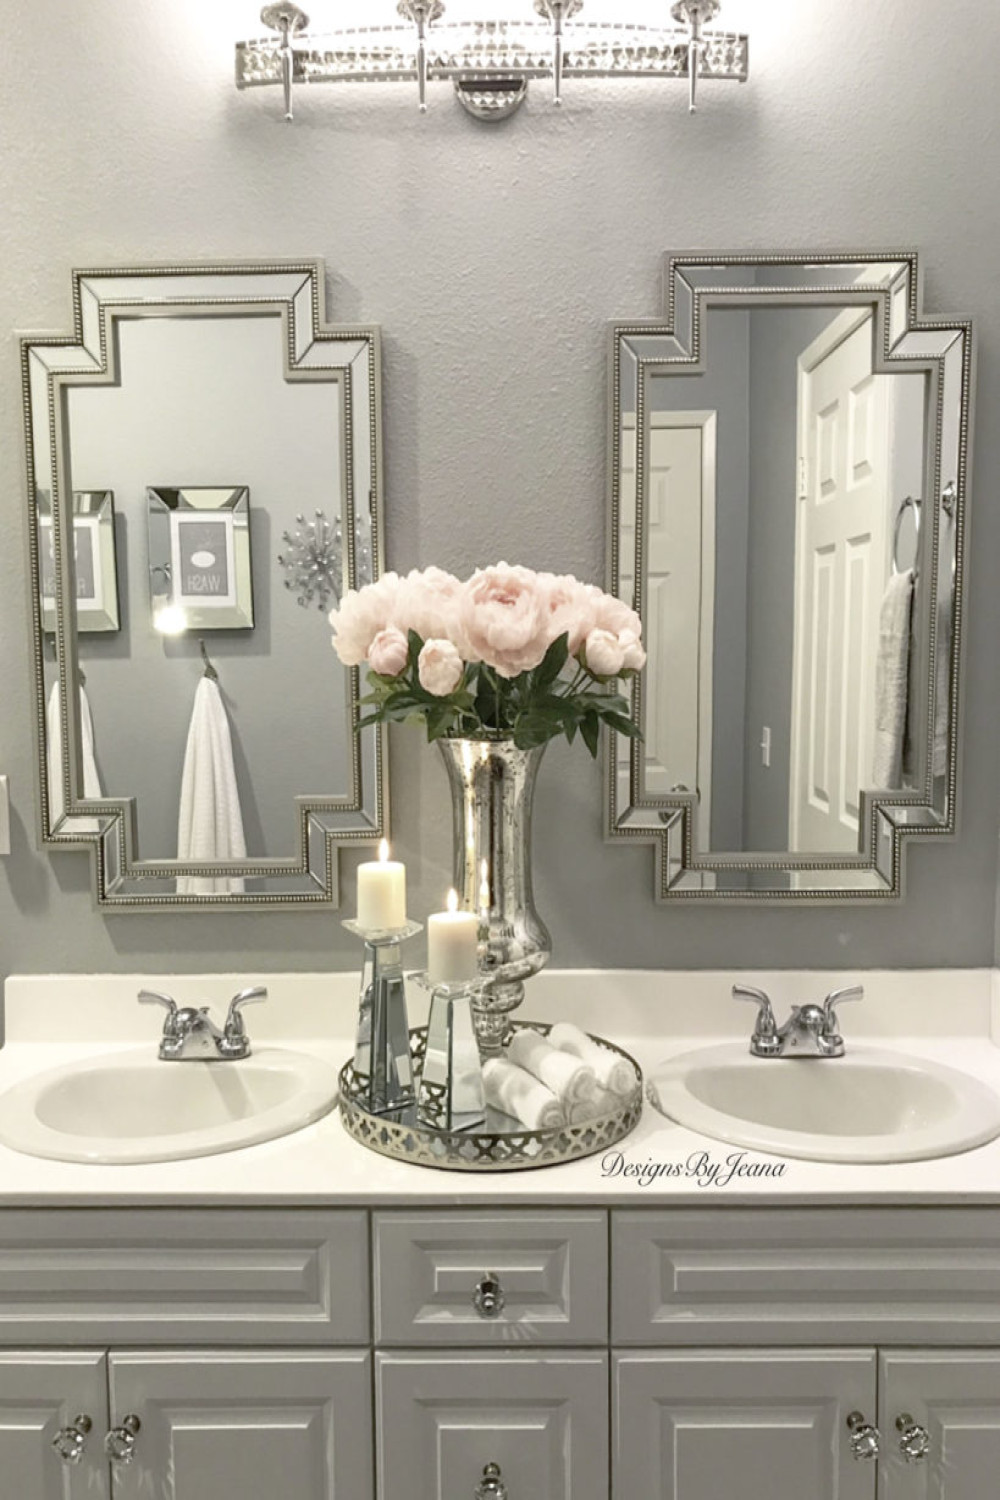 Five Things You Can Do to Create a Glam Bathroom - Designs by Jeana